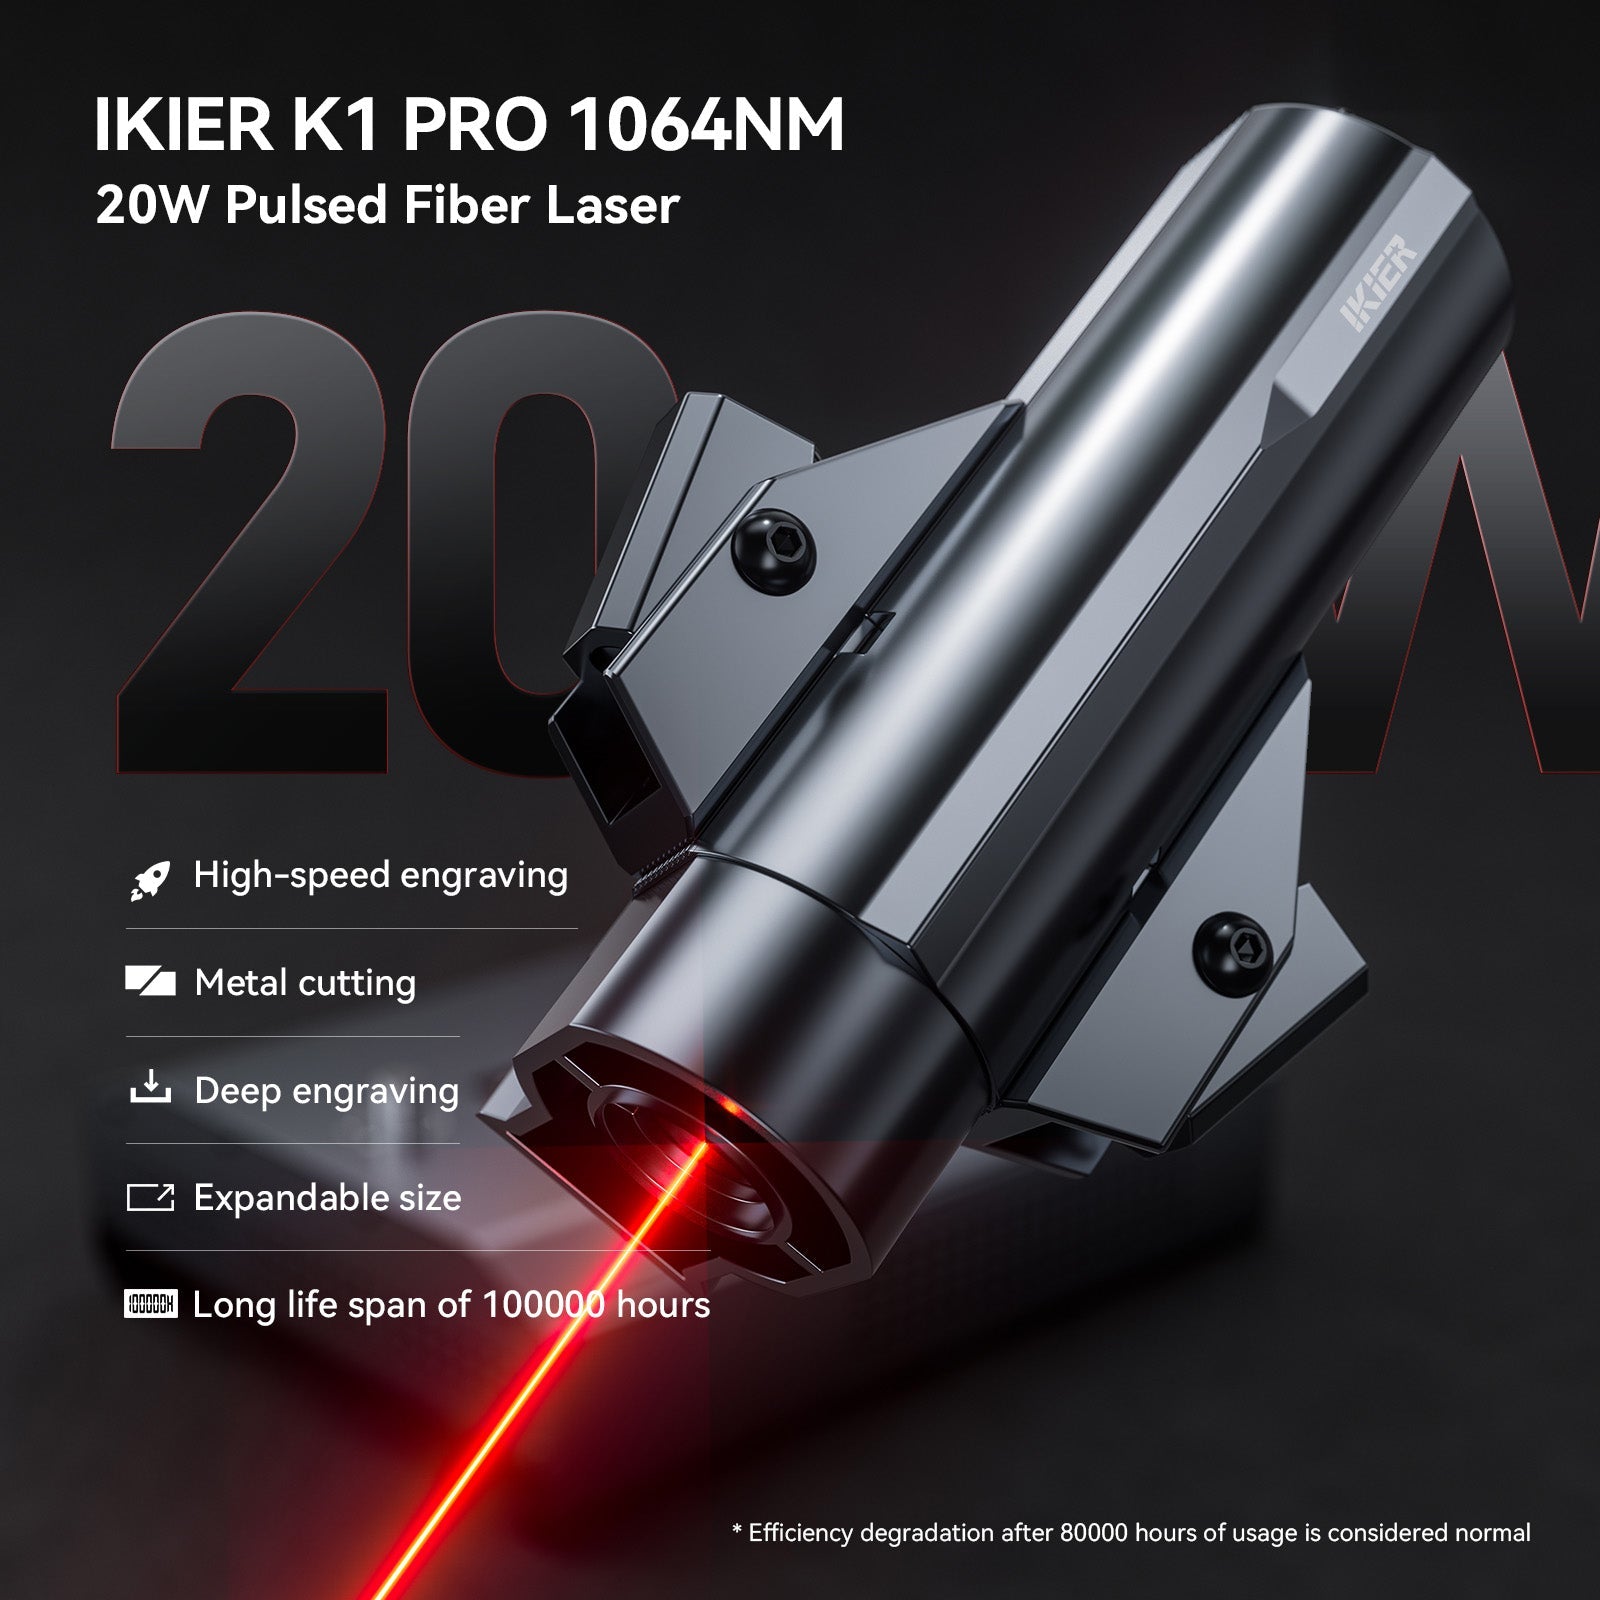 Best 1064nm infrared portable laser pointer for professionals